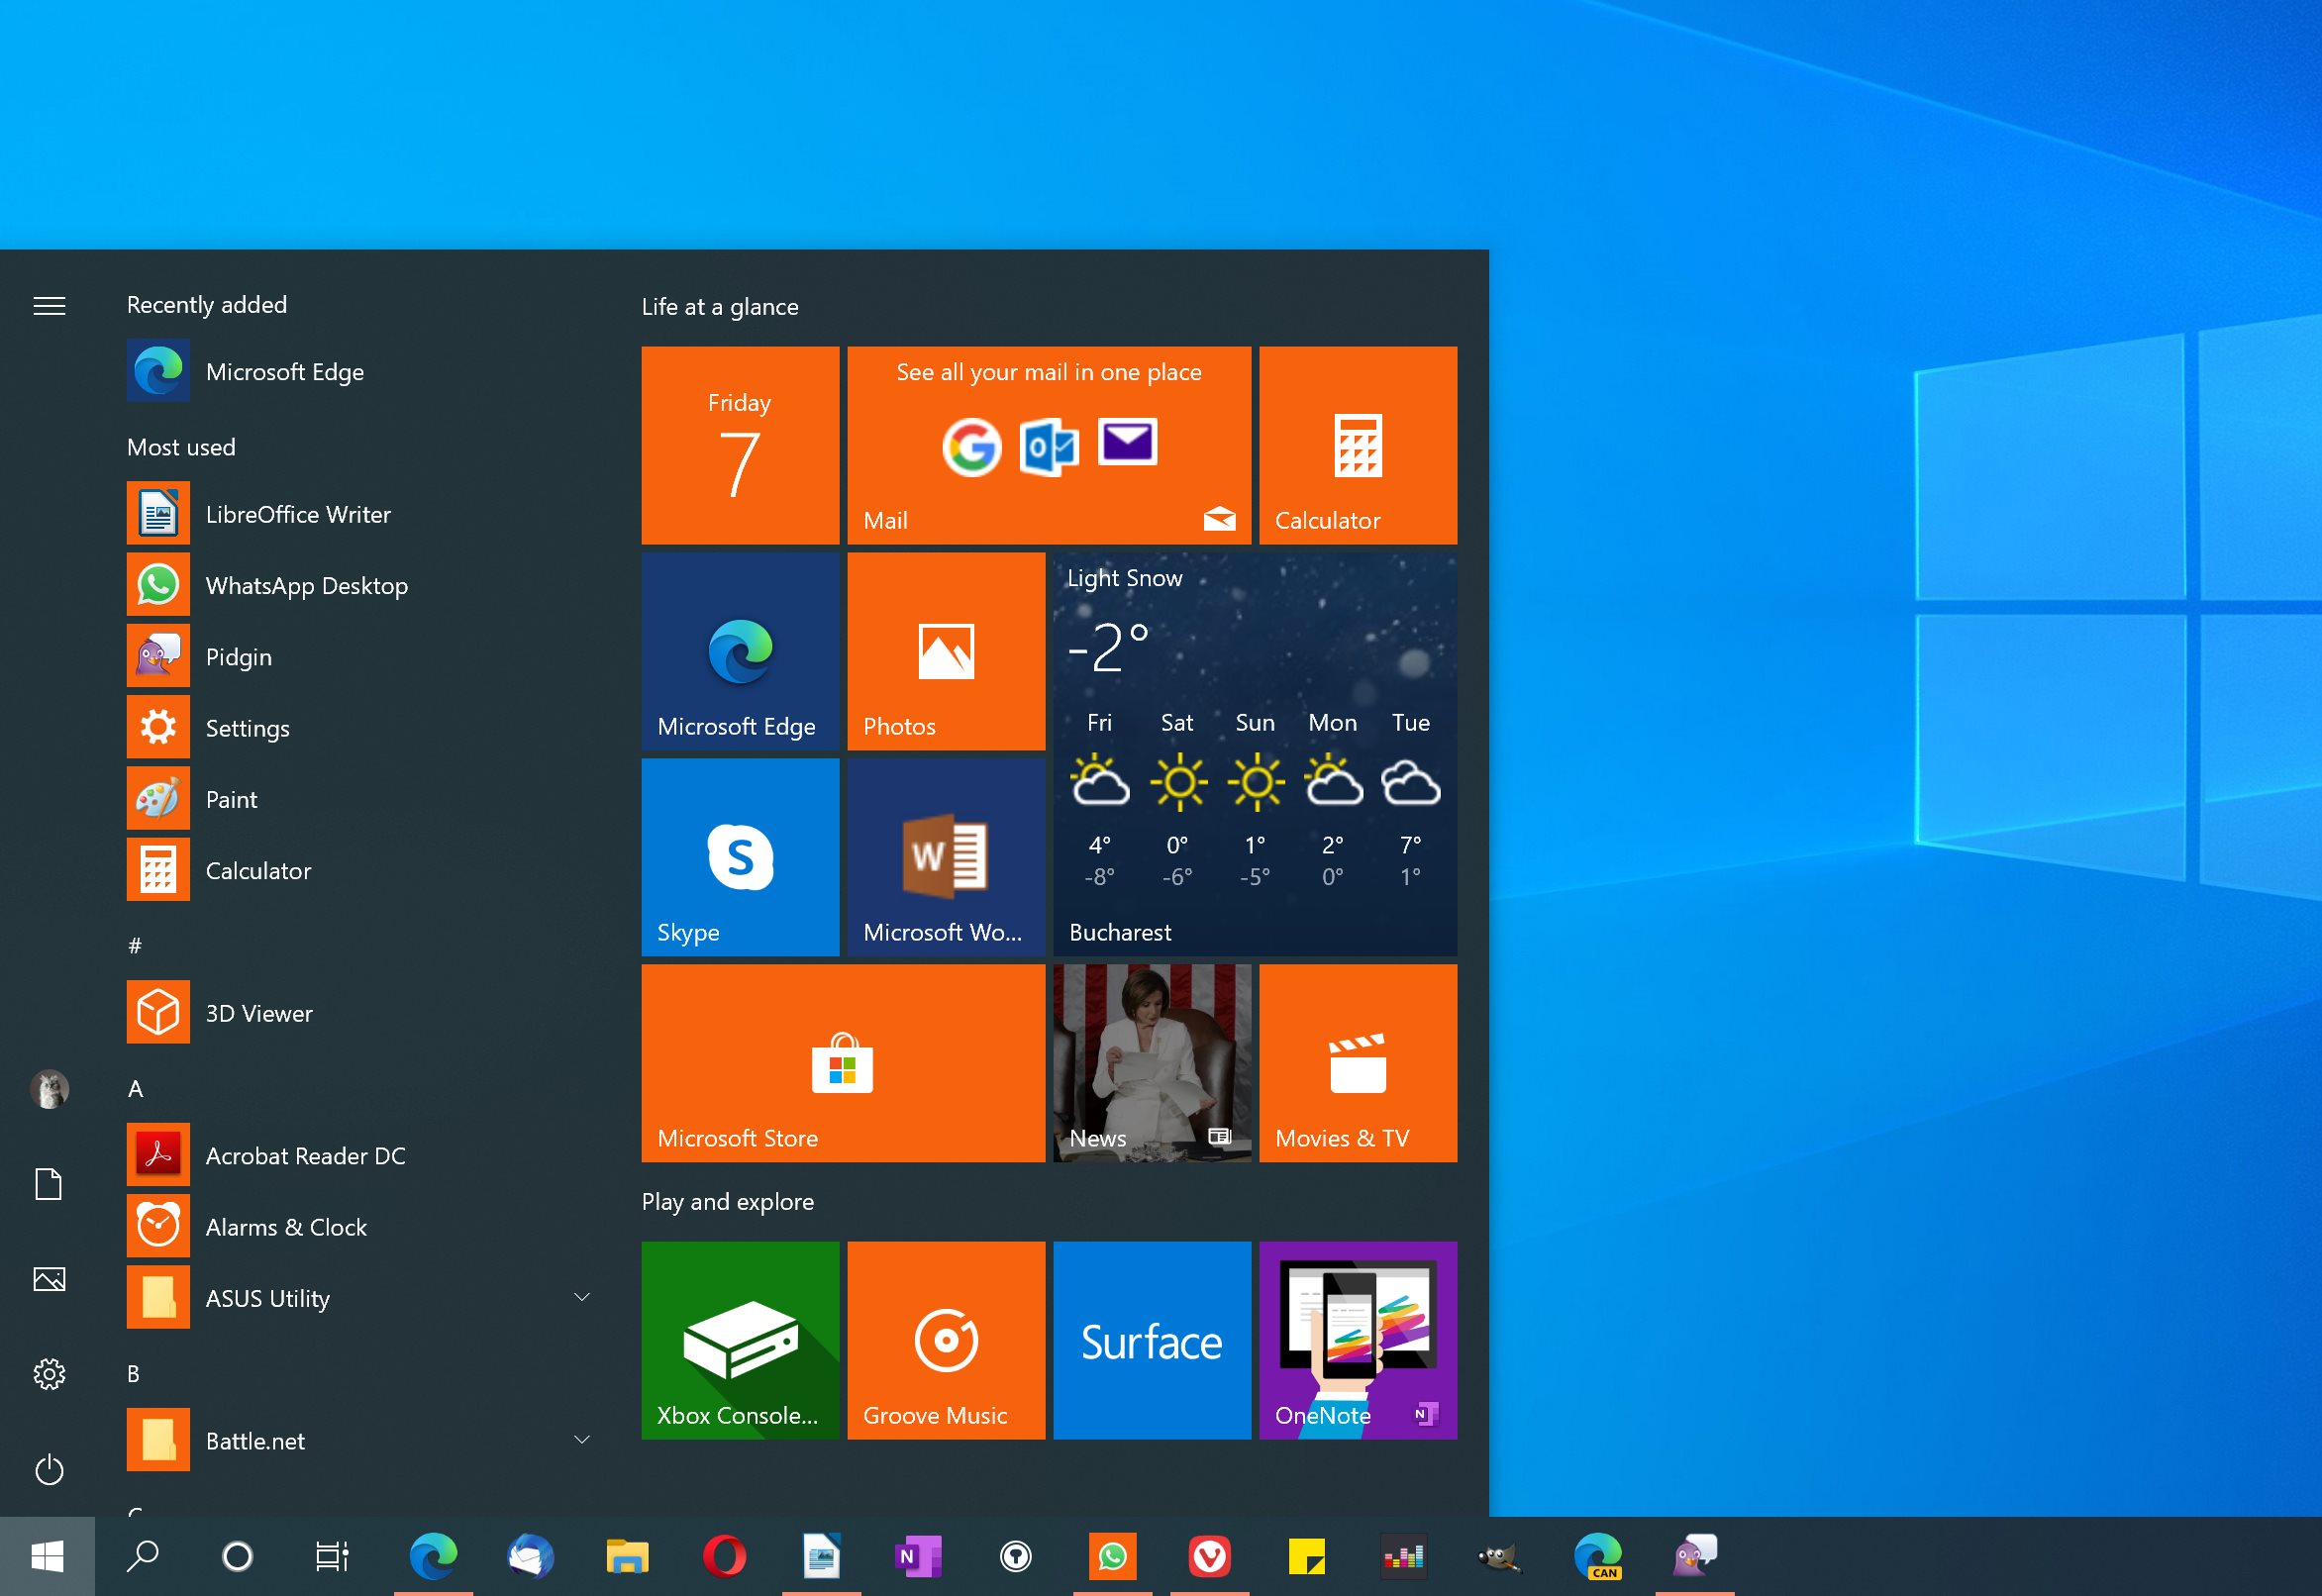 Free Upgrades from Windows 7 to Windows 10 Still Working in February 2020